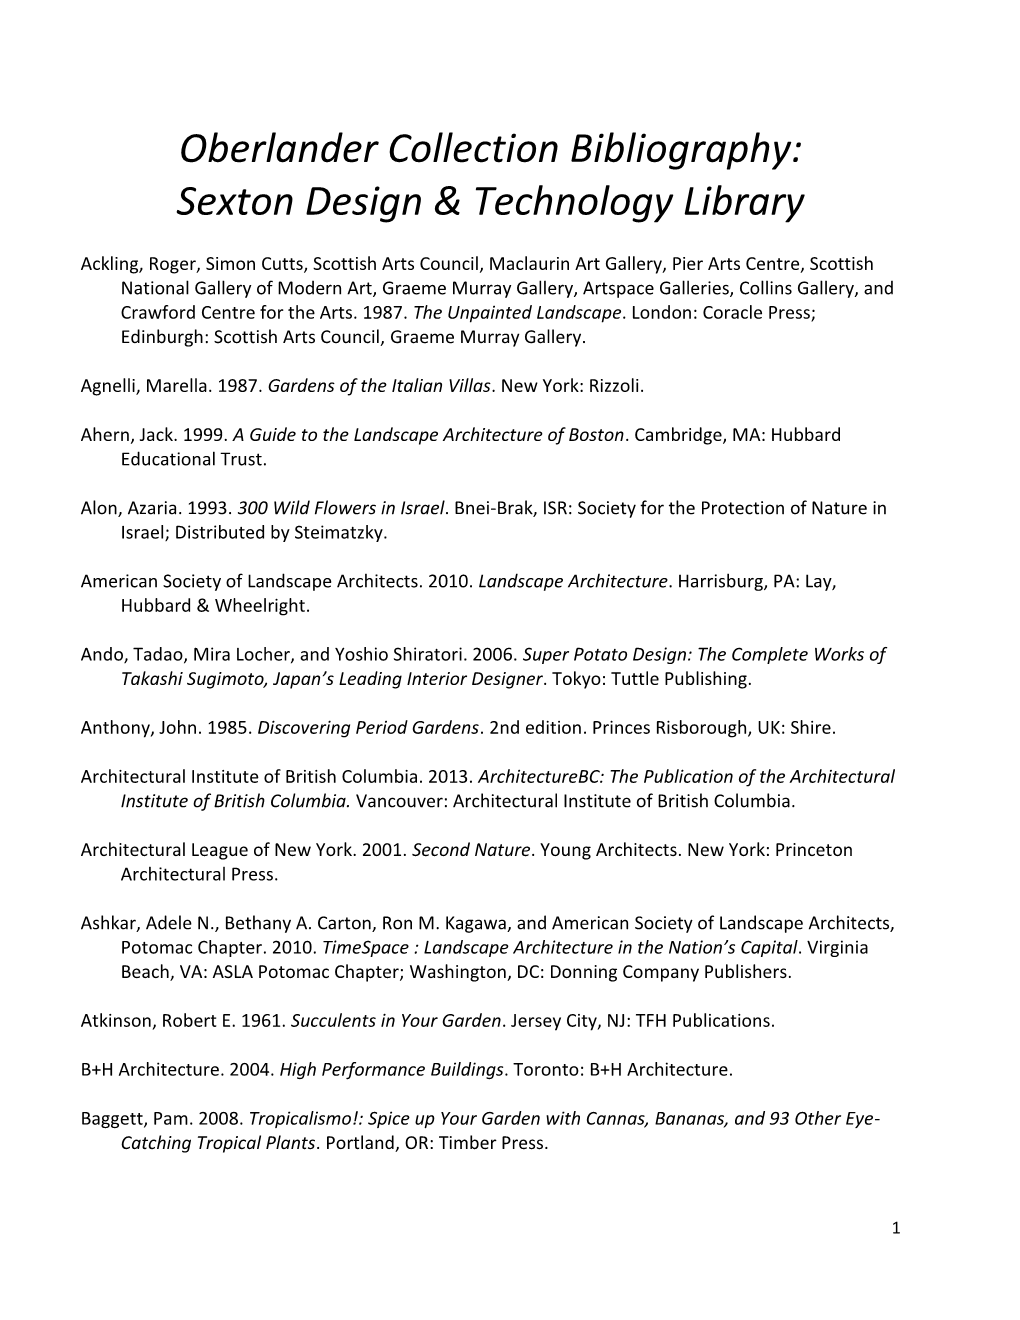 Oberlander Collection Bibliography: Sexton Design & Technology Library